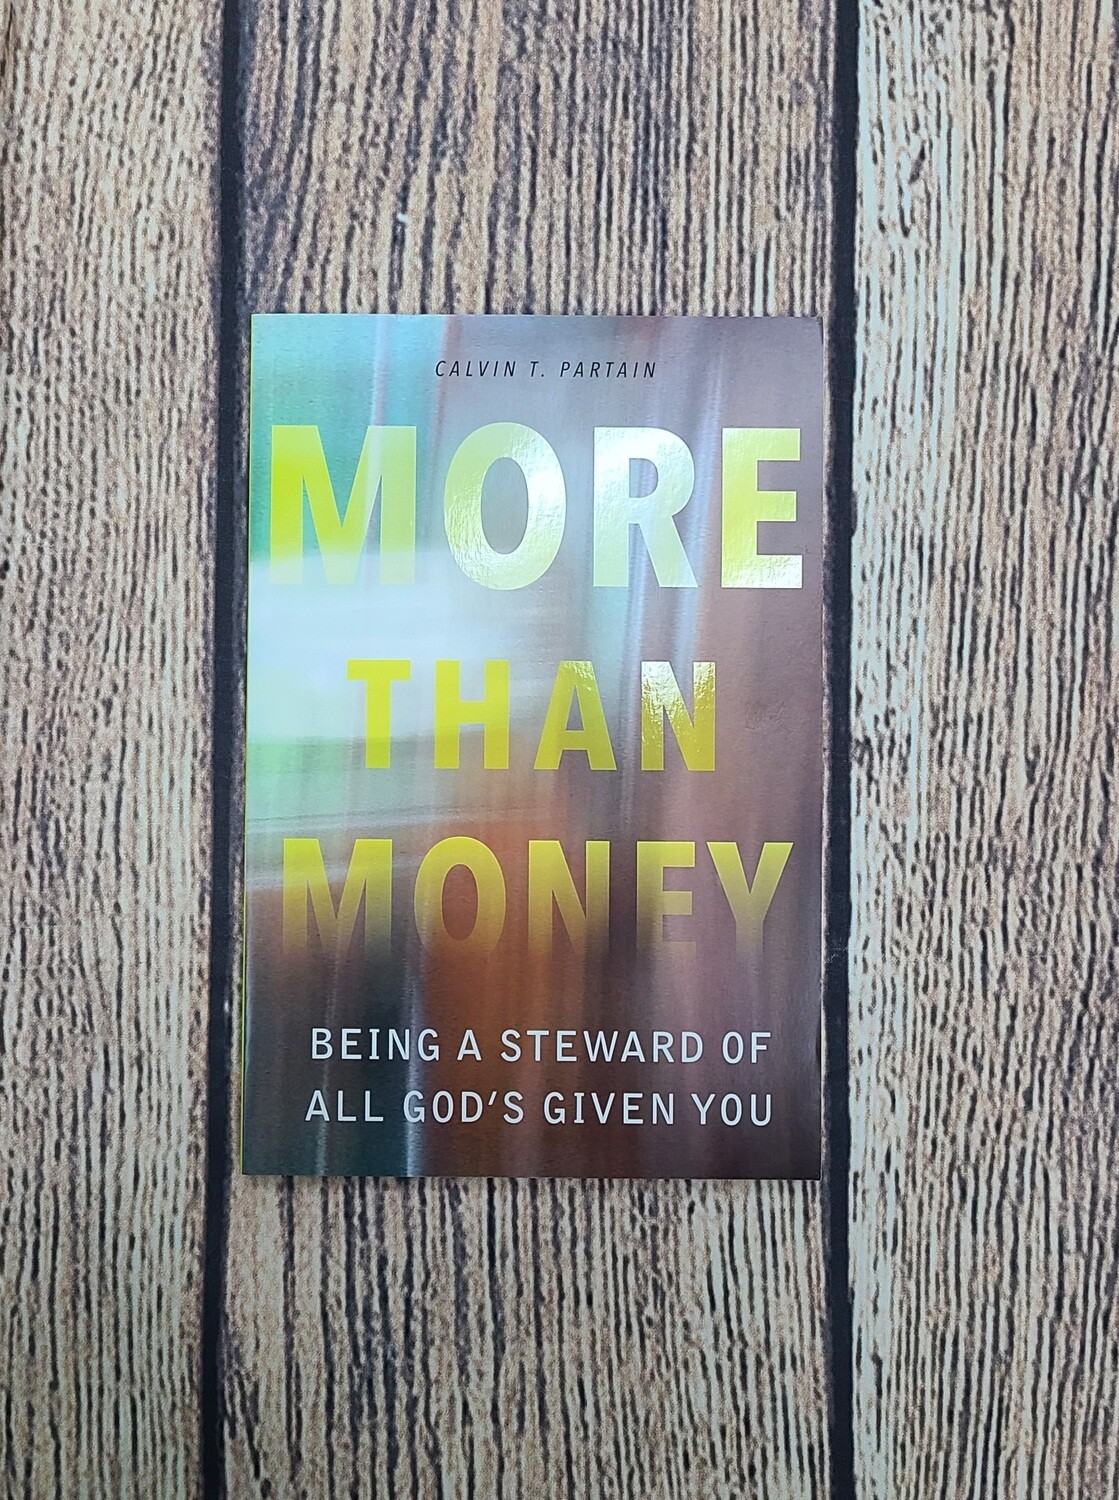 More Than Money: Being a Steward of All God's Given You by Calvin T. Partain